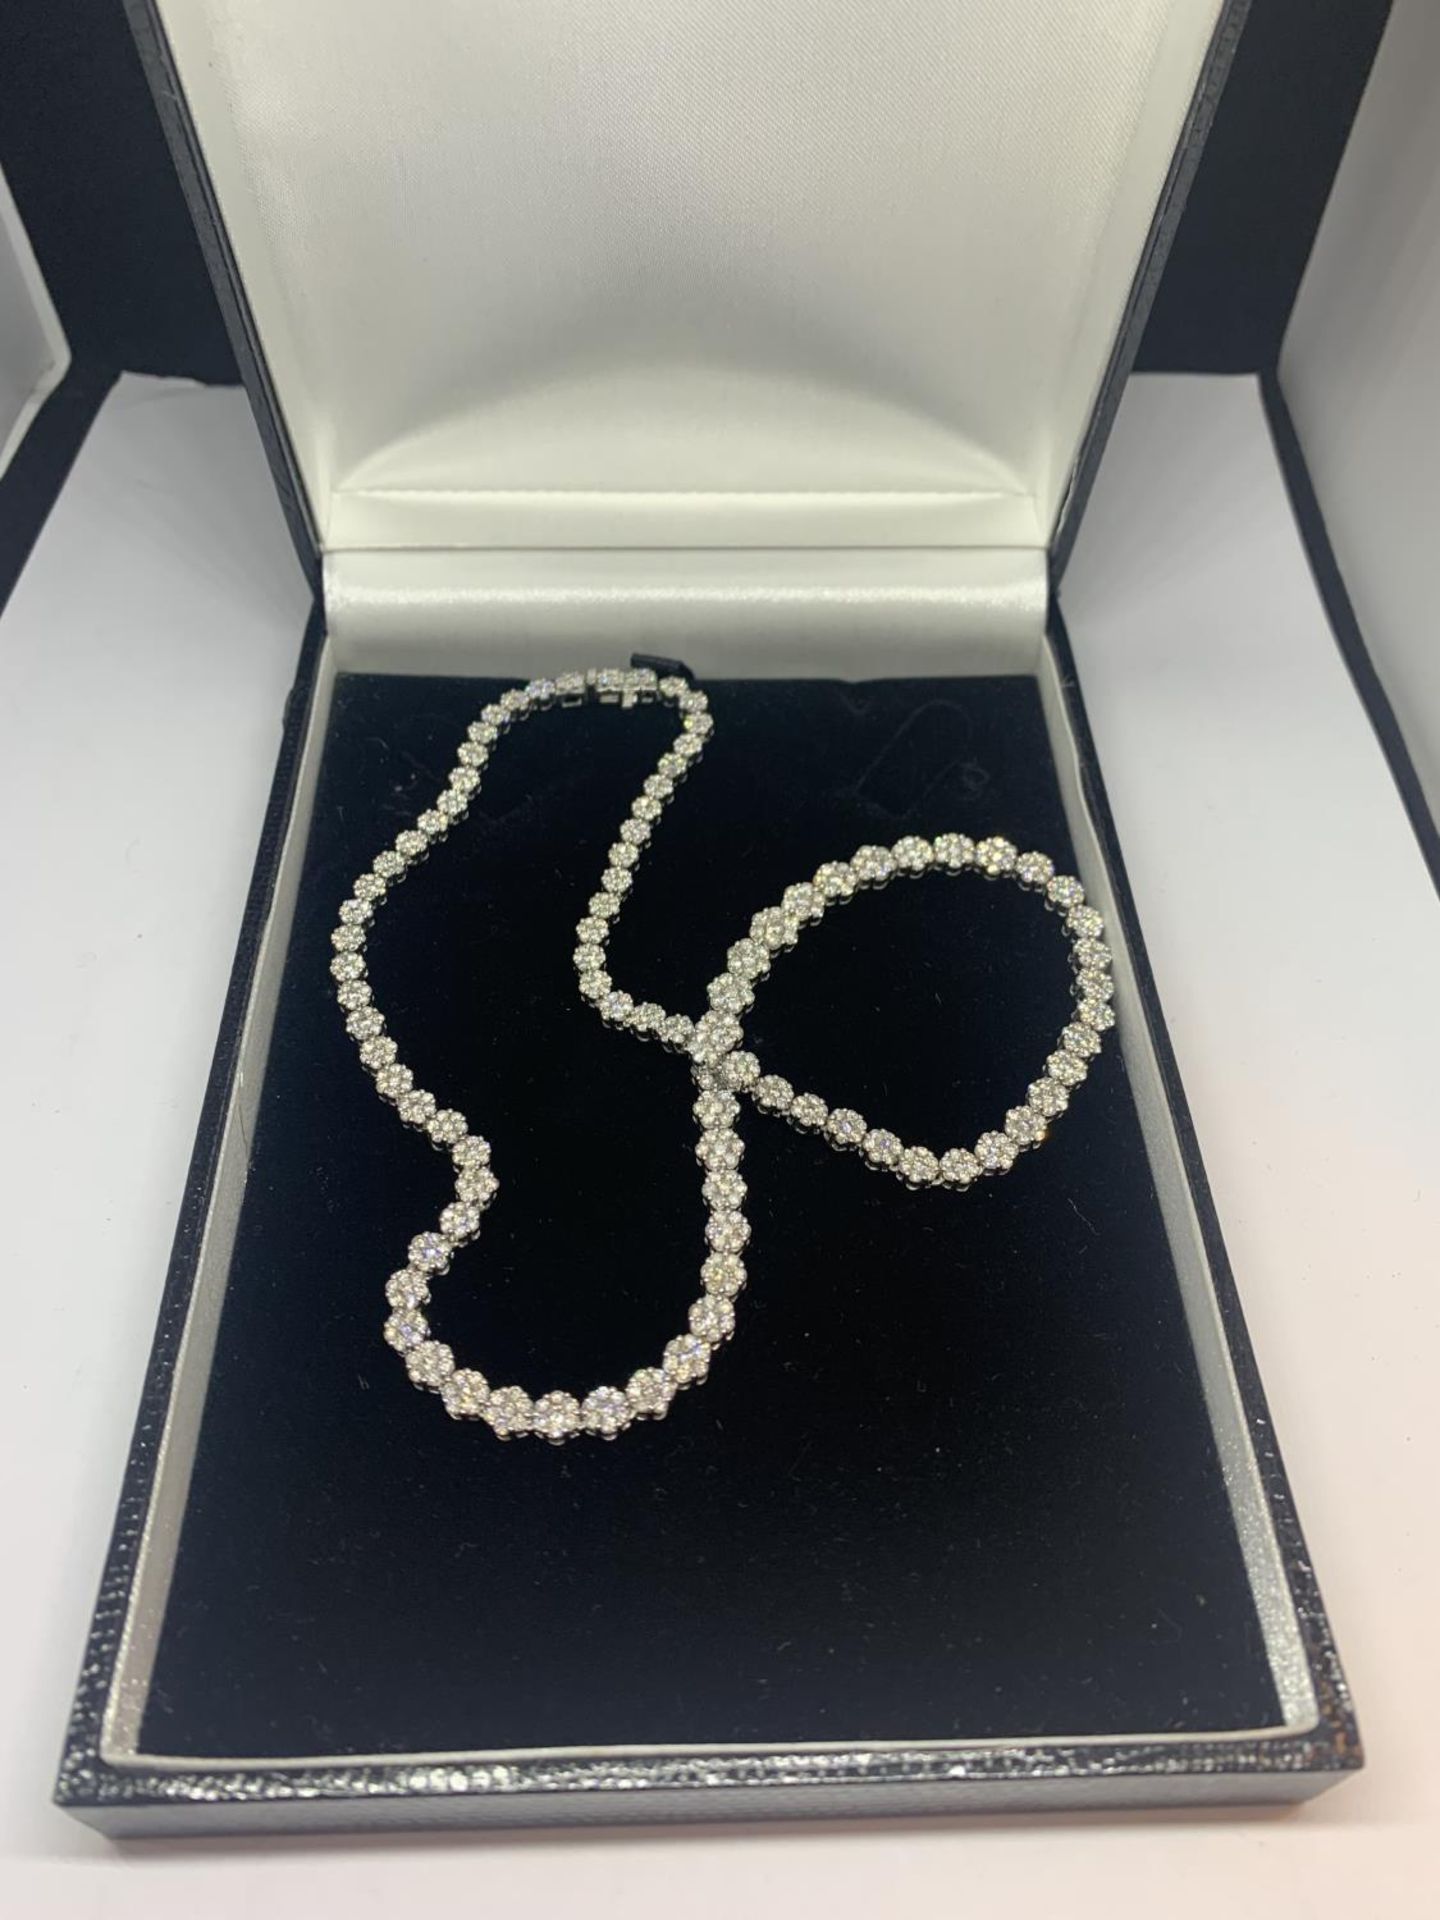 AN 18 CARAT WHITE GOLD NECKLACE WITH 10 CARAT OF DIAMONDS LENGTH APPROXIMATELY 43CM - Image 2 of 10